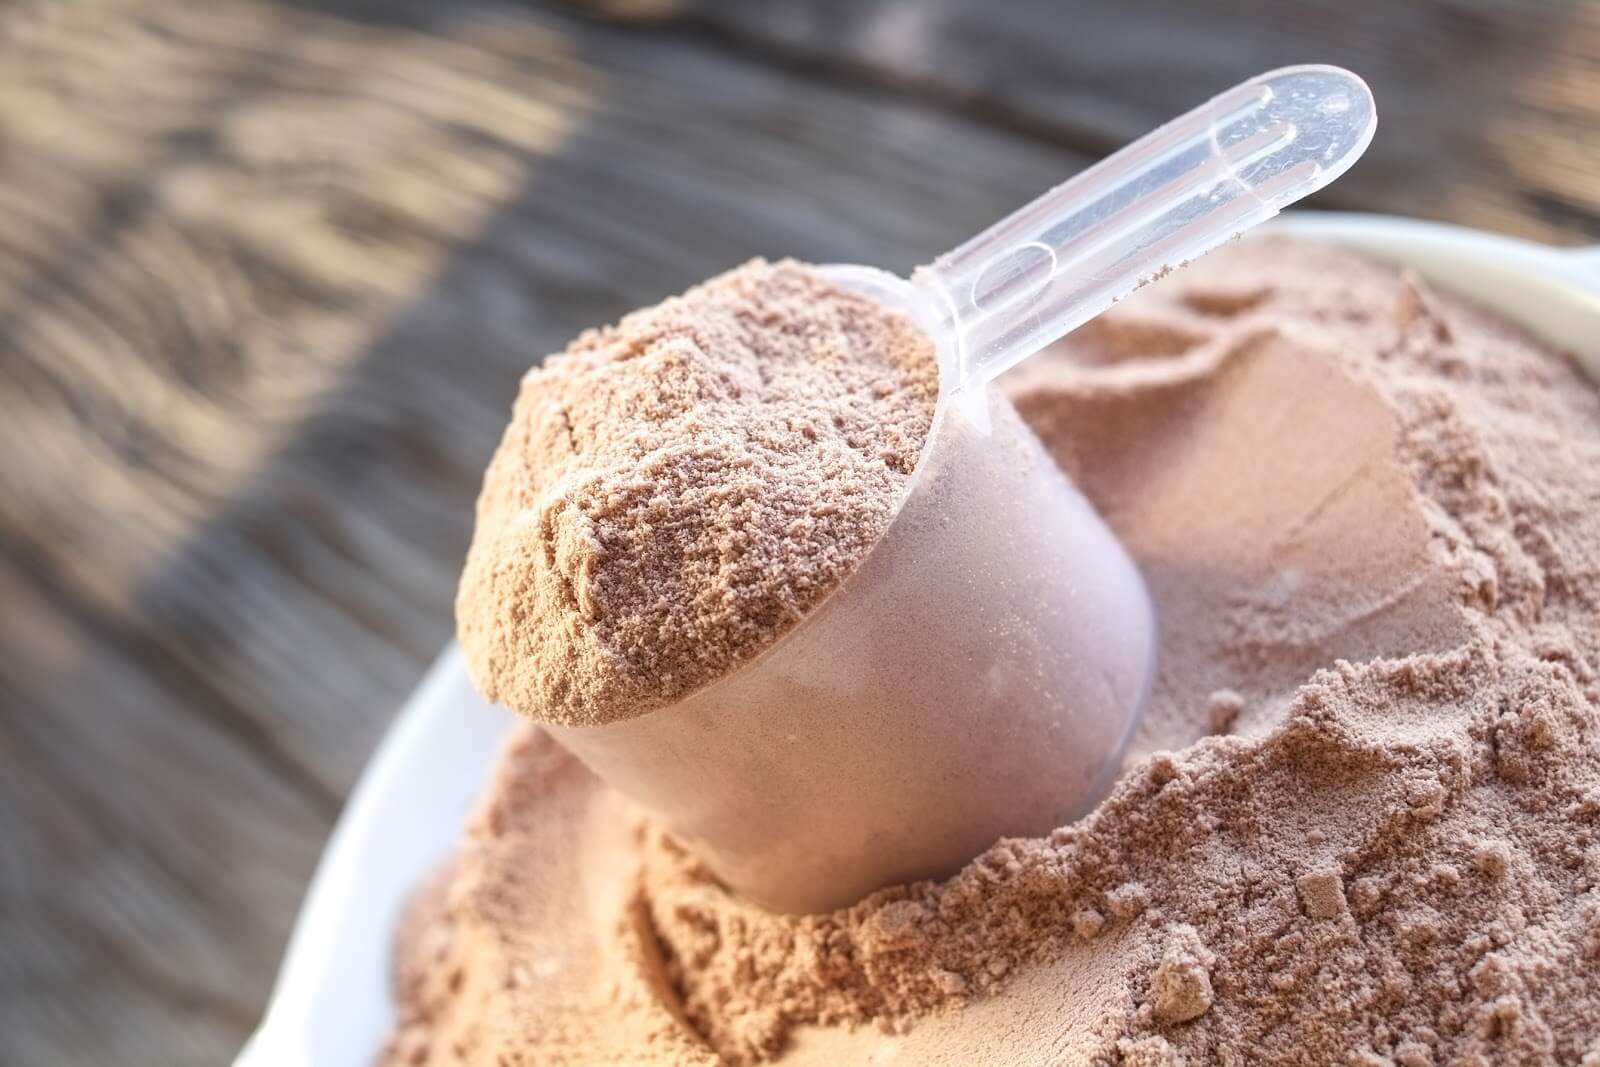 Protein Powder as a Supplement 